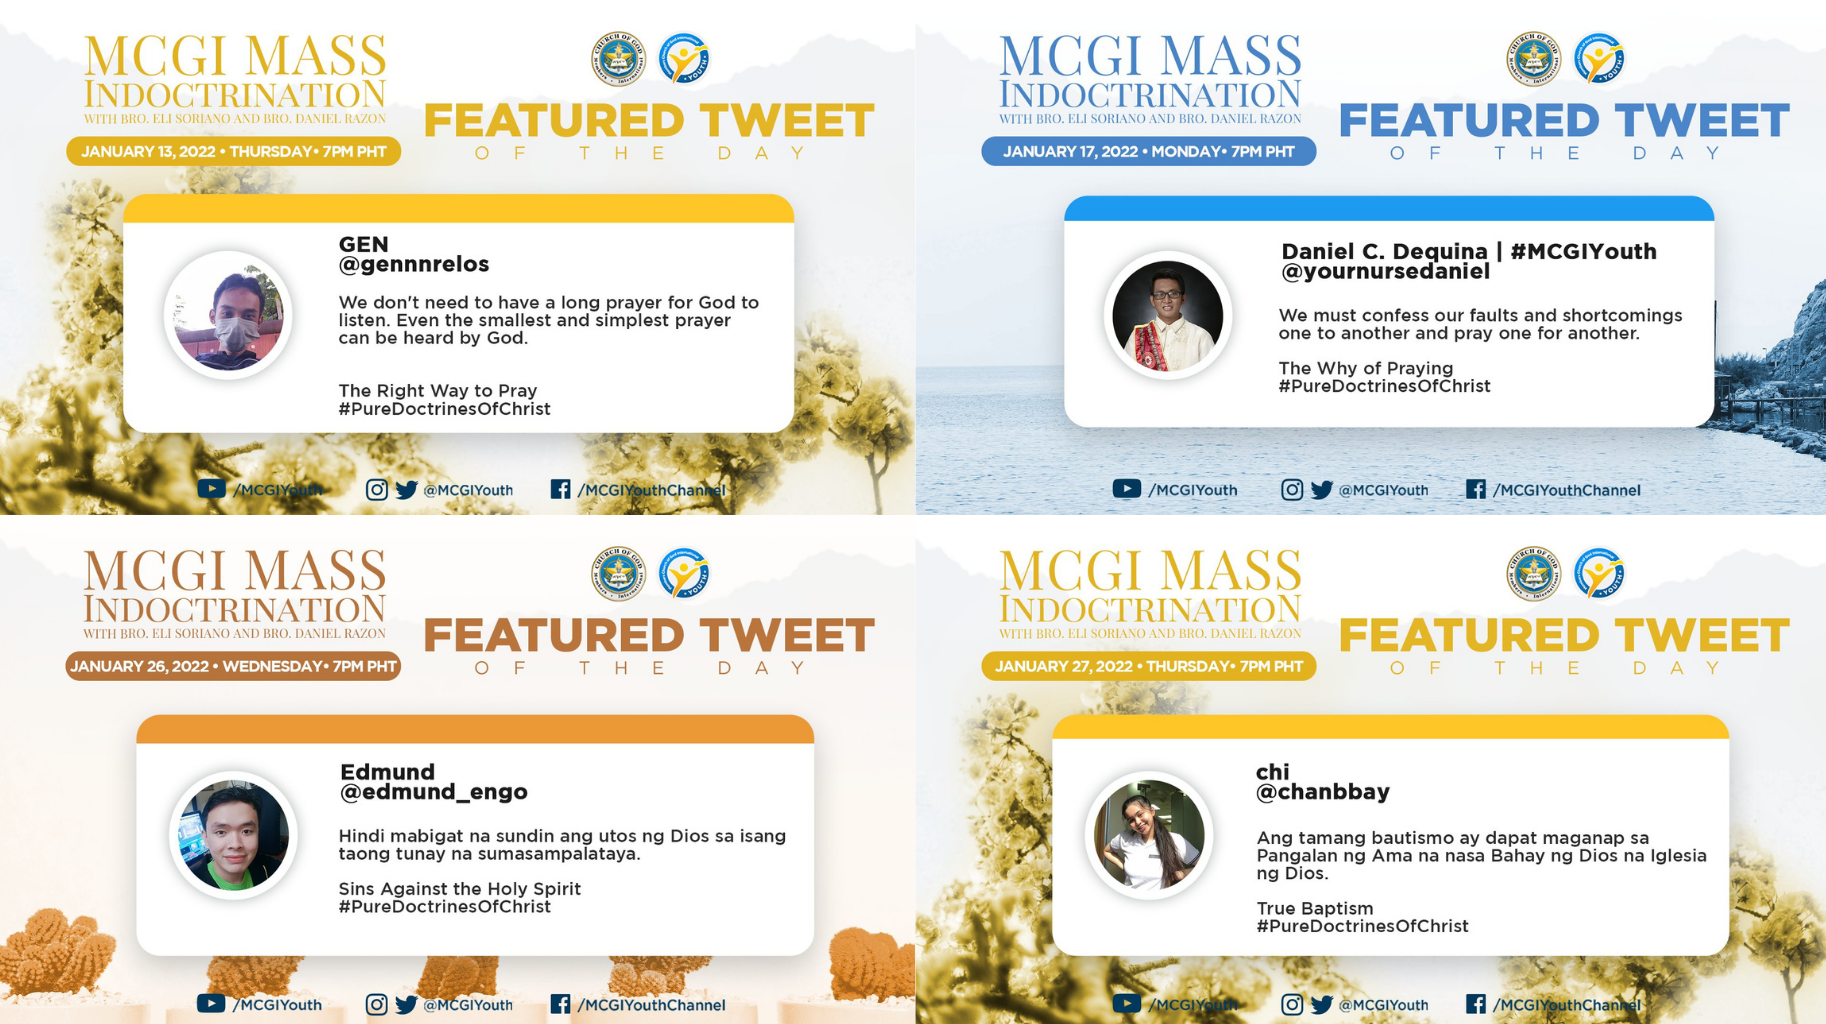 Tweets from Twitter user about MCGI Mass Indoctrination